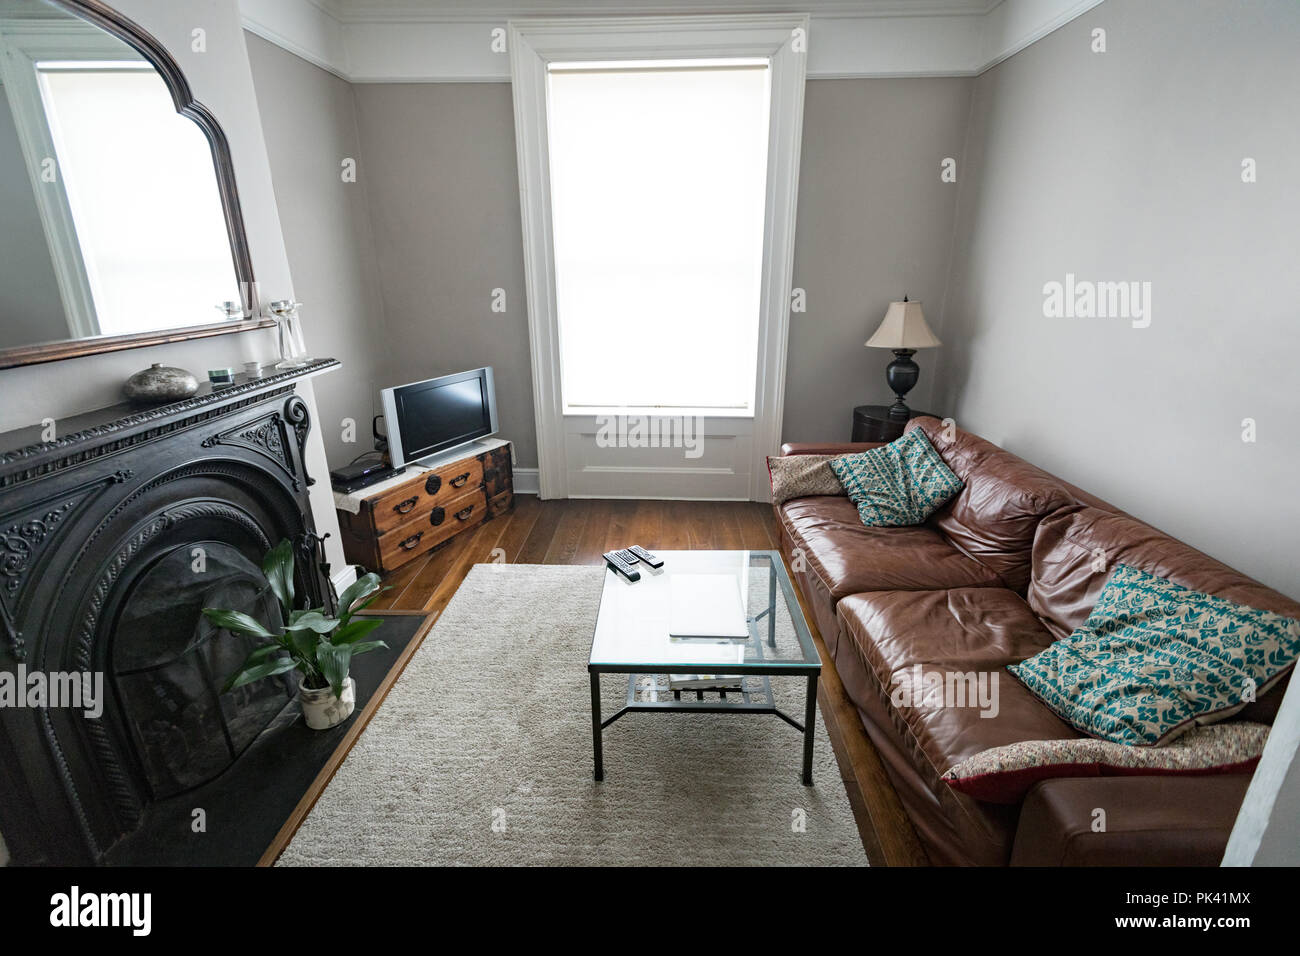 Interior of living room at home Stock Photo